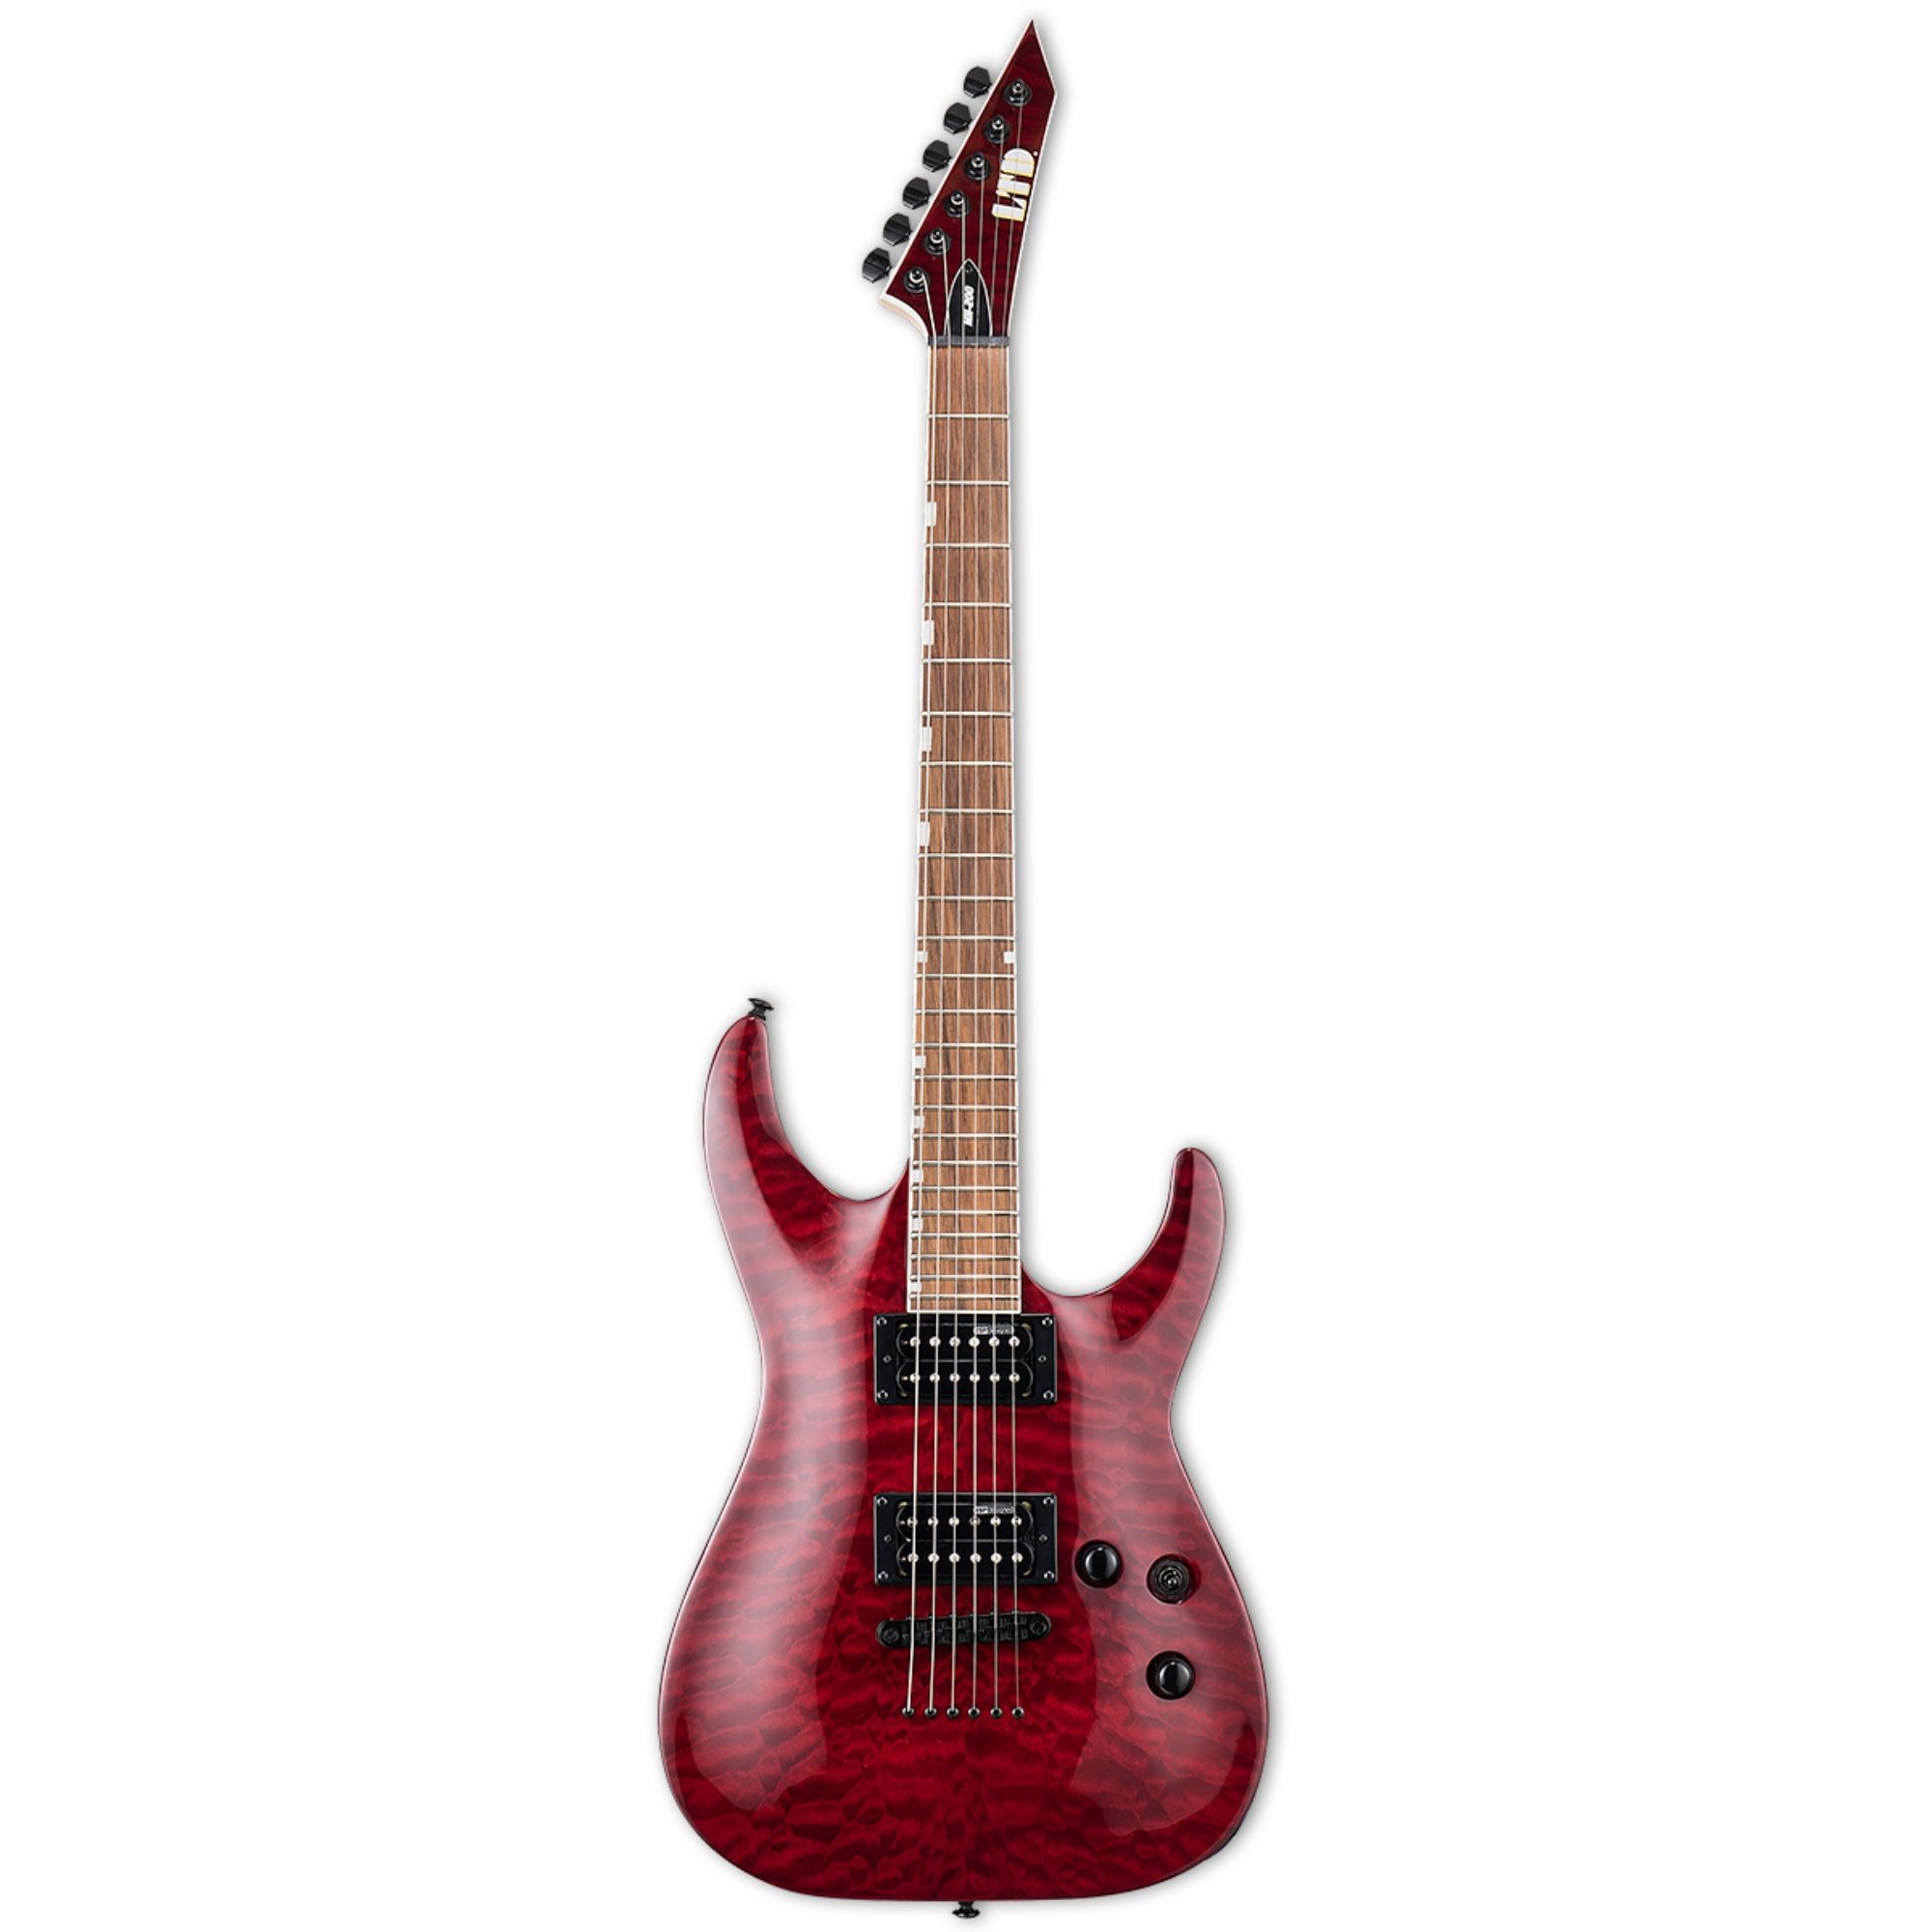 Buy esp mh200qm nt electric guitar online in India